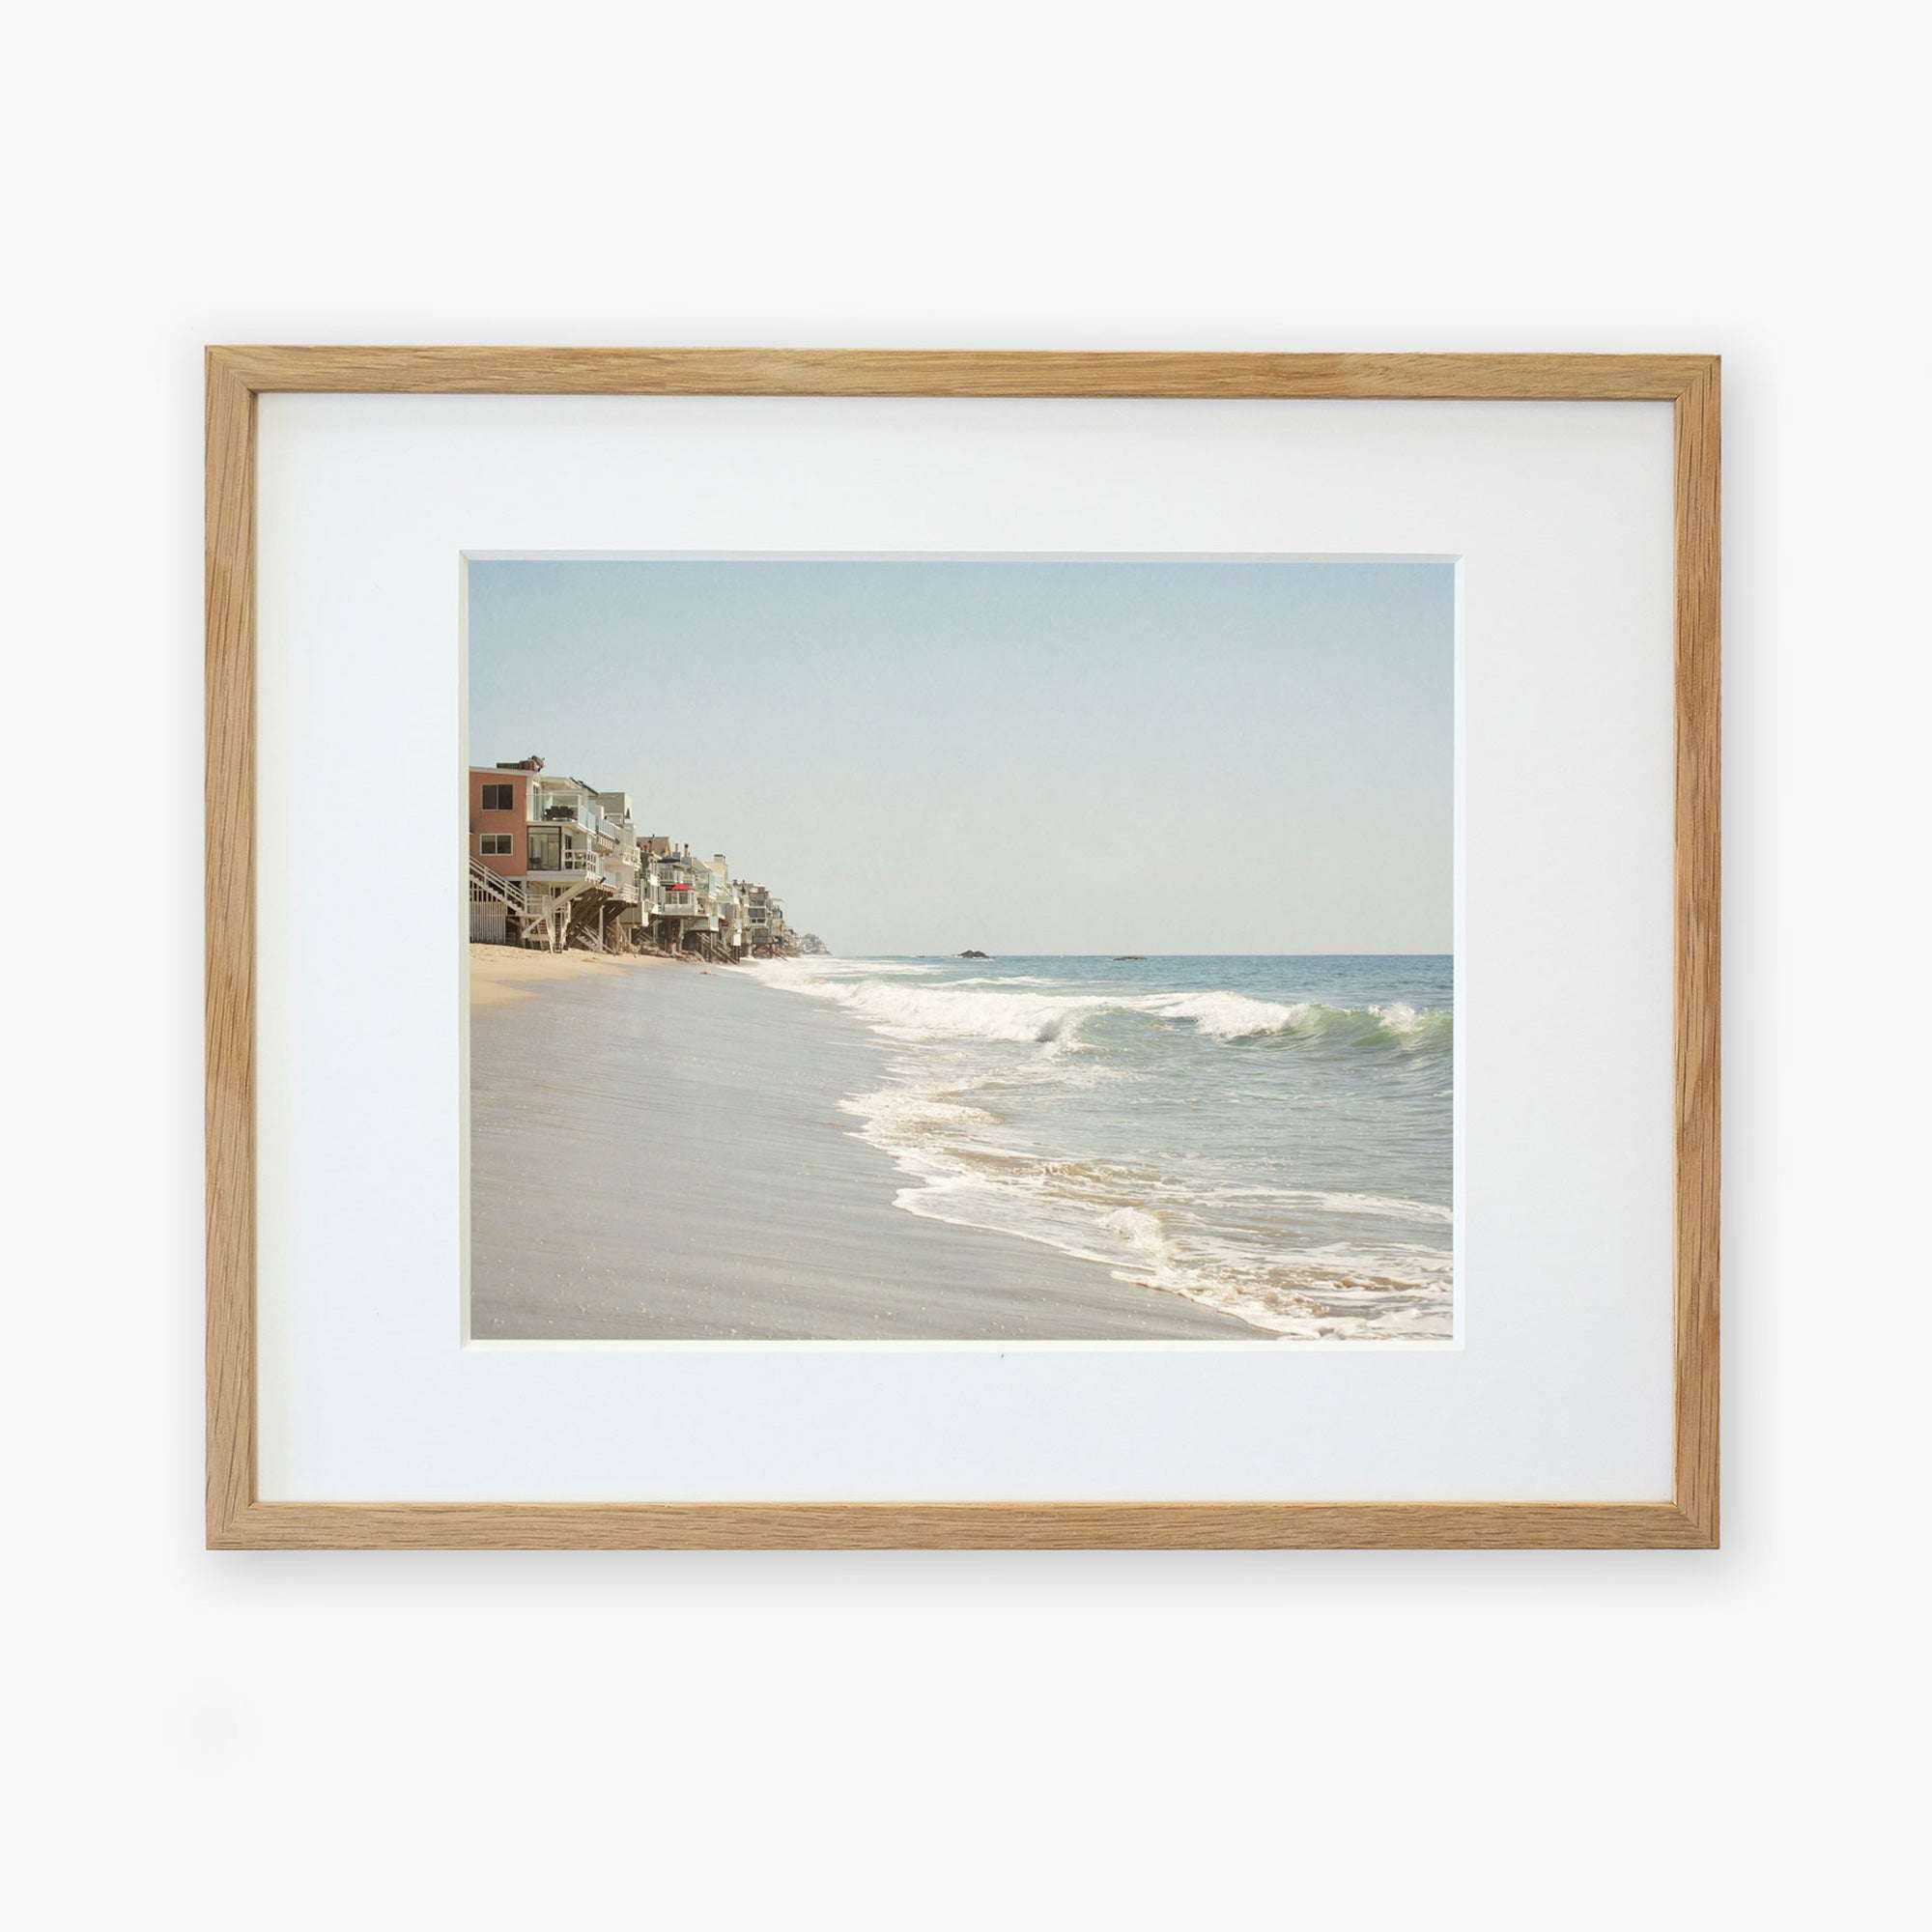 A framed photograph of a Malibu Beach House Print, 'Ocean View' by Offley Green showing gentle waves lapping onto a sandy shore with a line of houses extending along the beachfront.